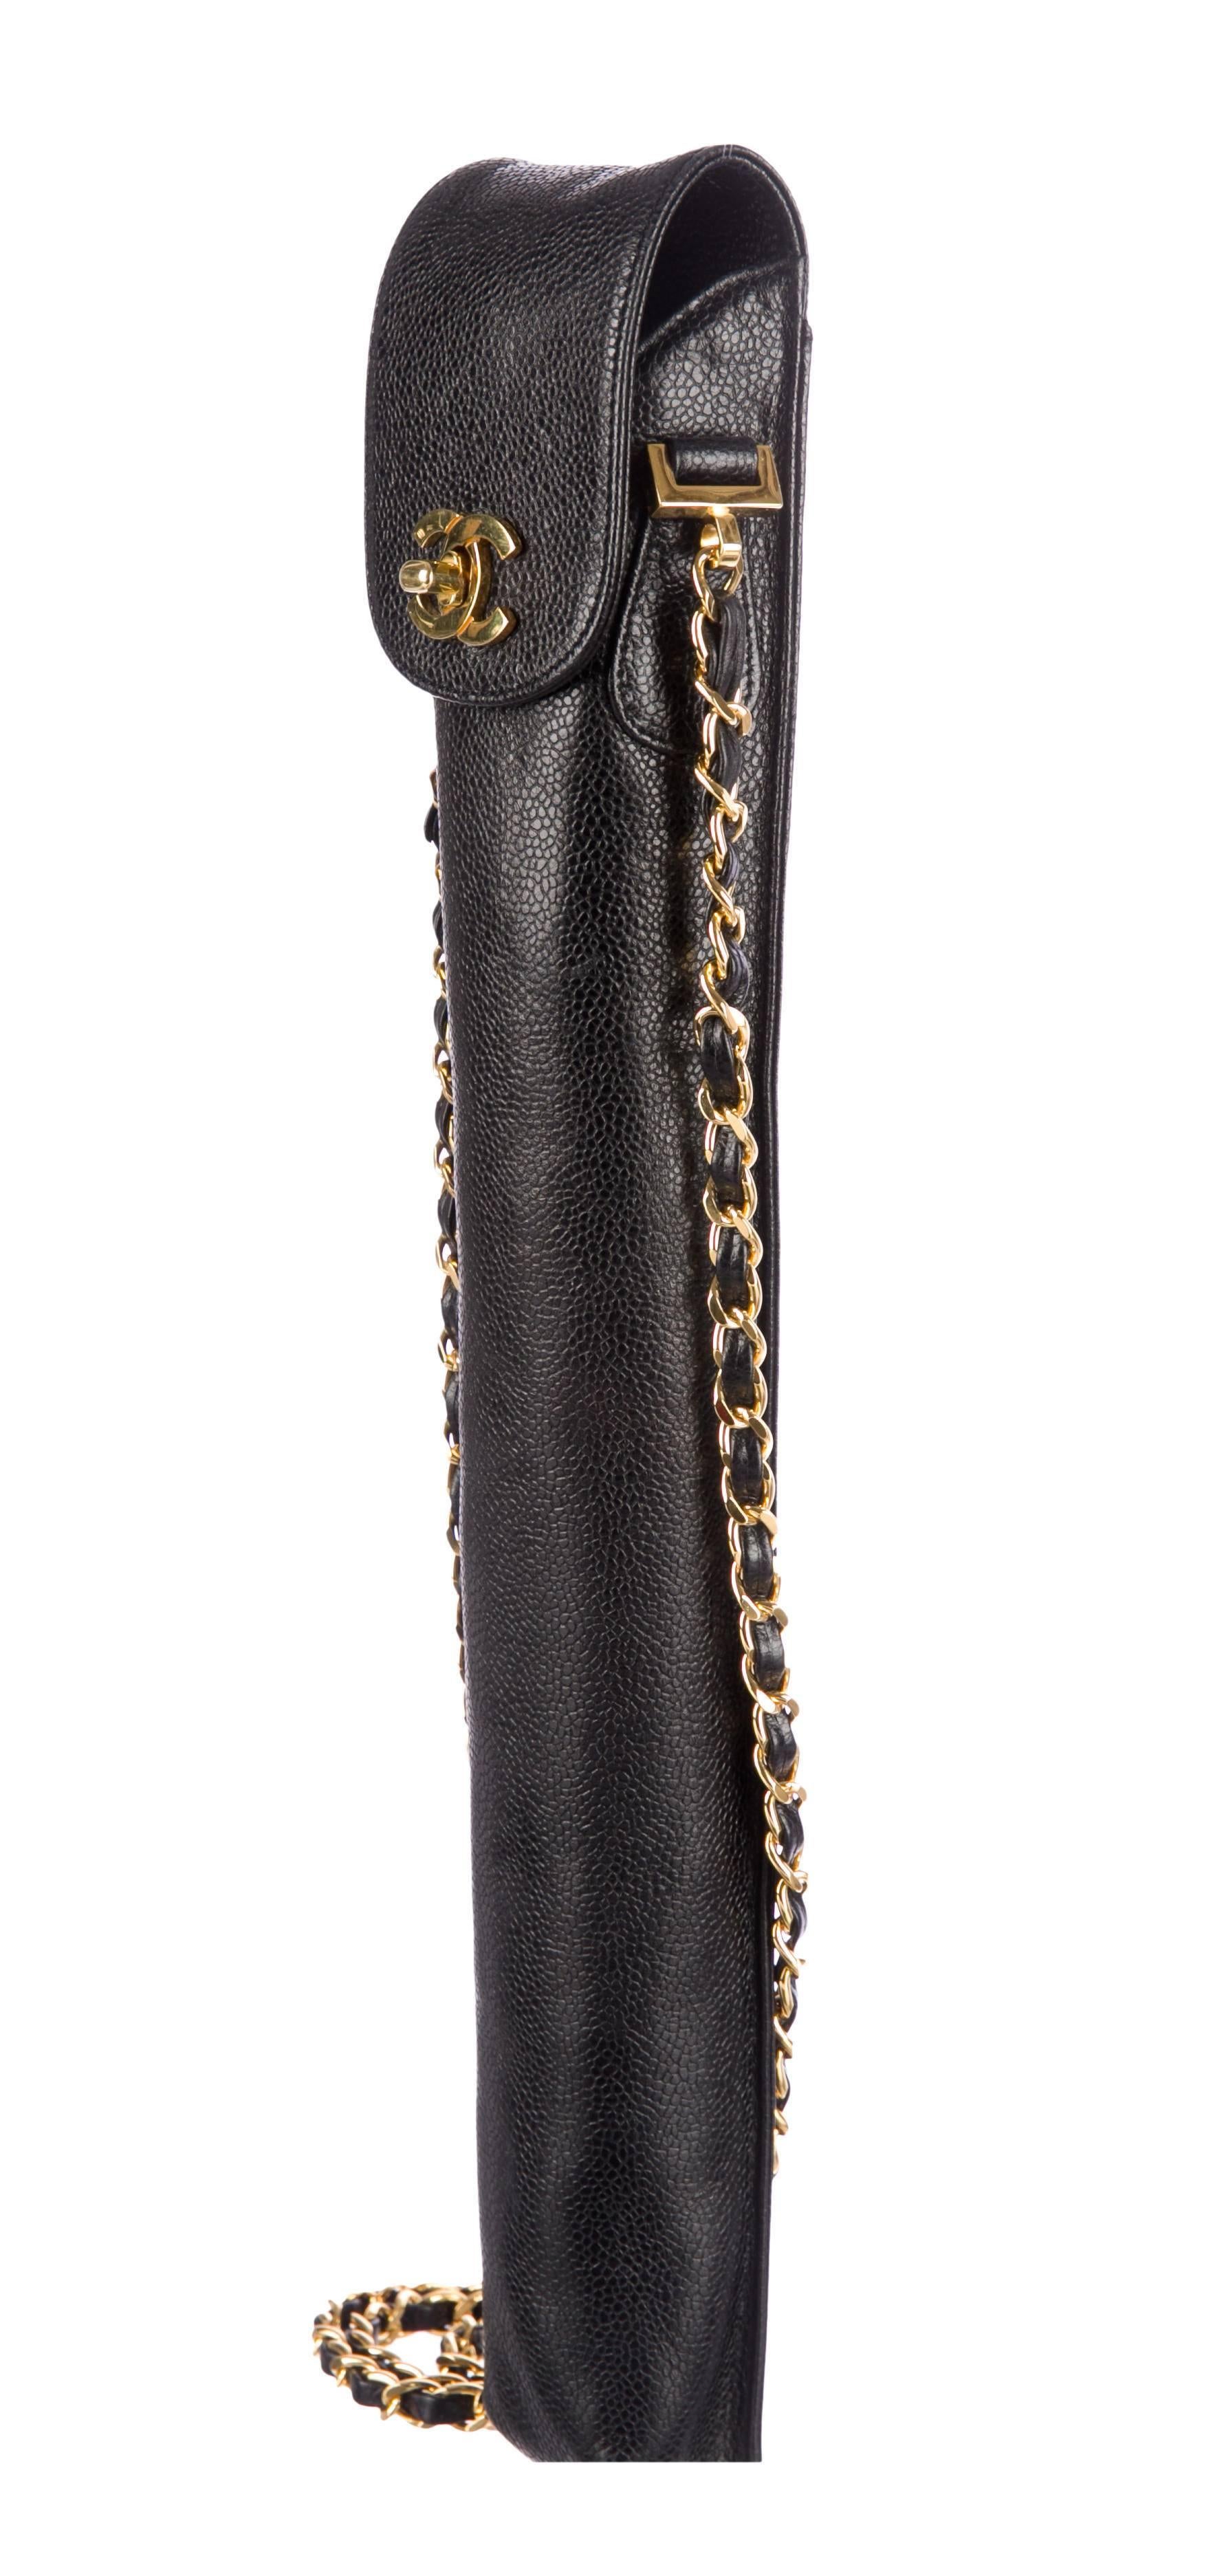 Chanel Black Caviar Leather Umbrella Case, 1995 In Good Condition For Sale In Bethesda, MD